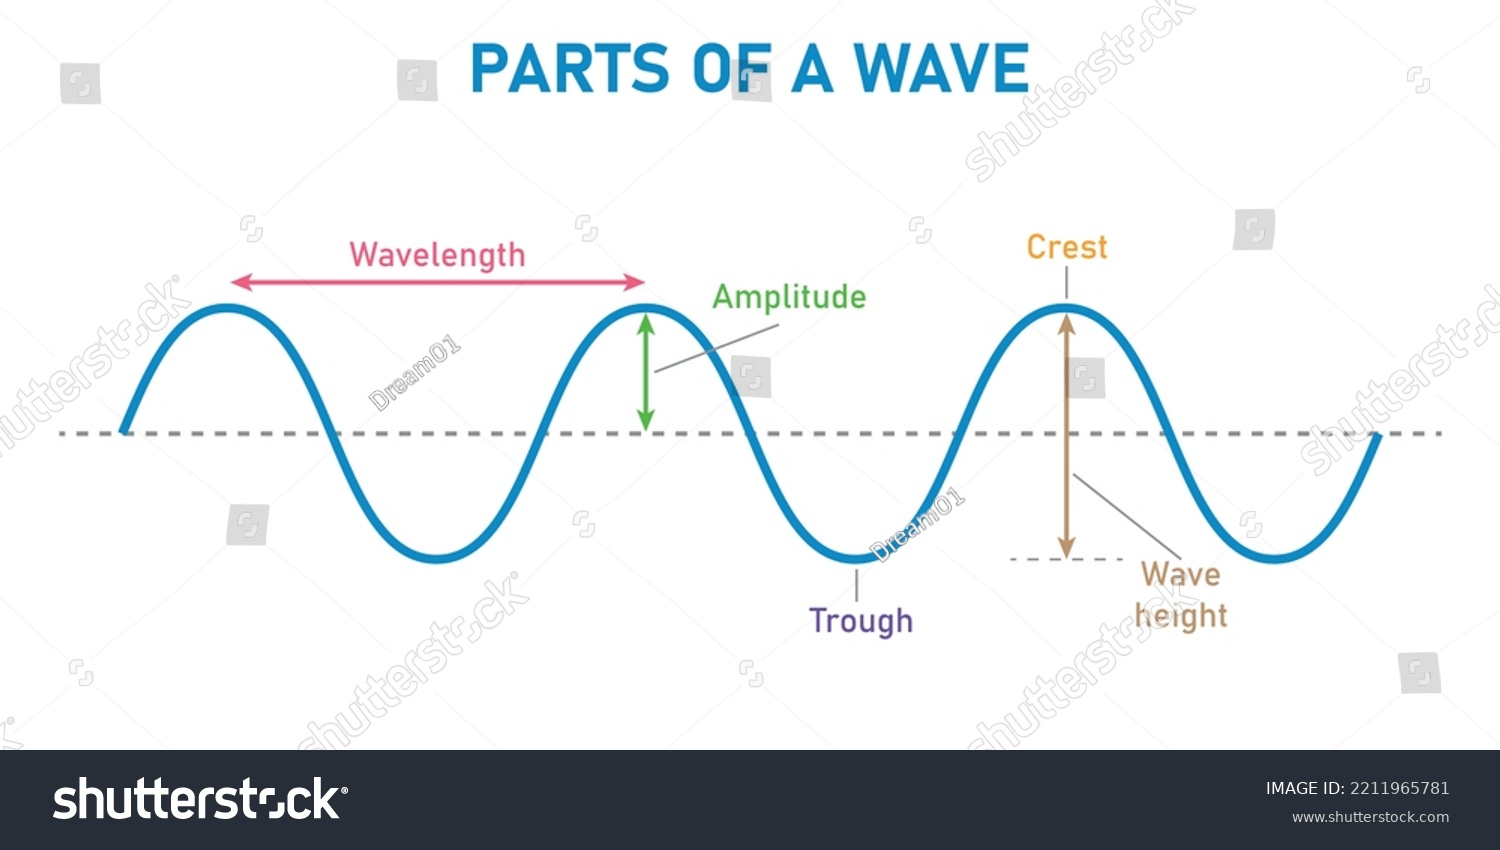 The basic properties of waves. parts of a wave. Scientific vector illustration isolated on white background. #2211965781